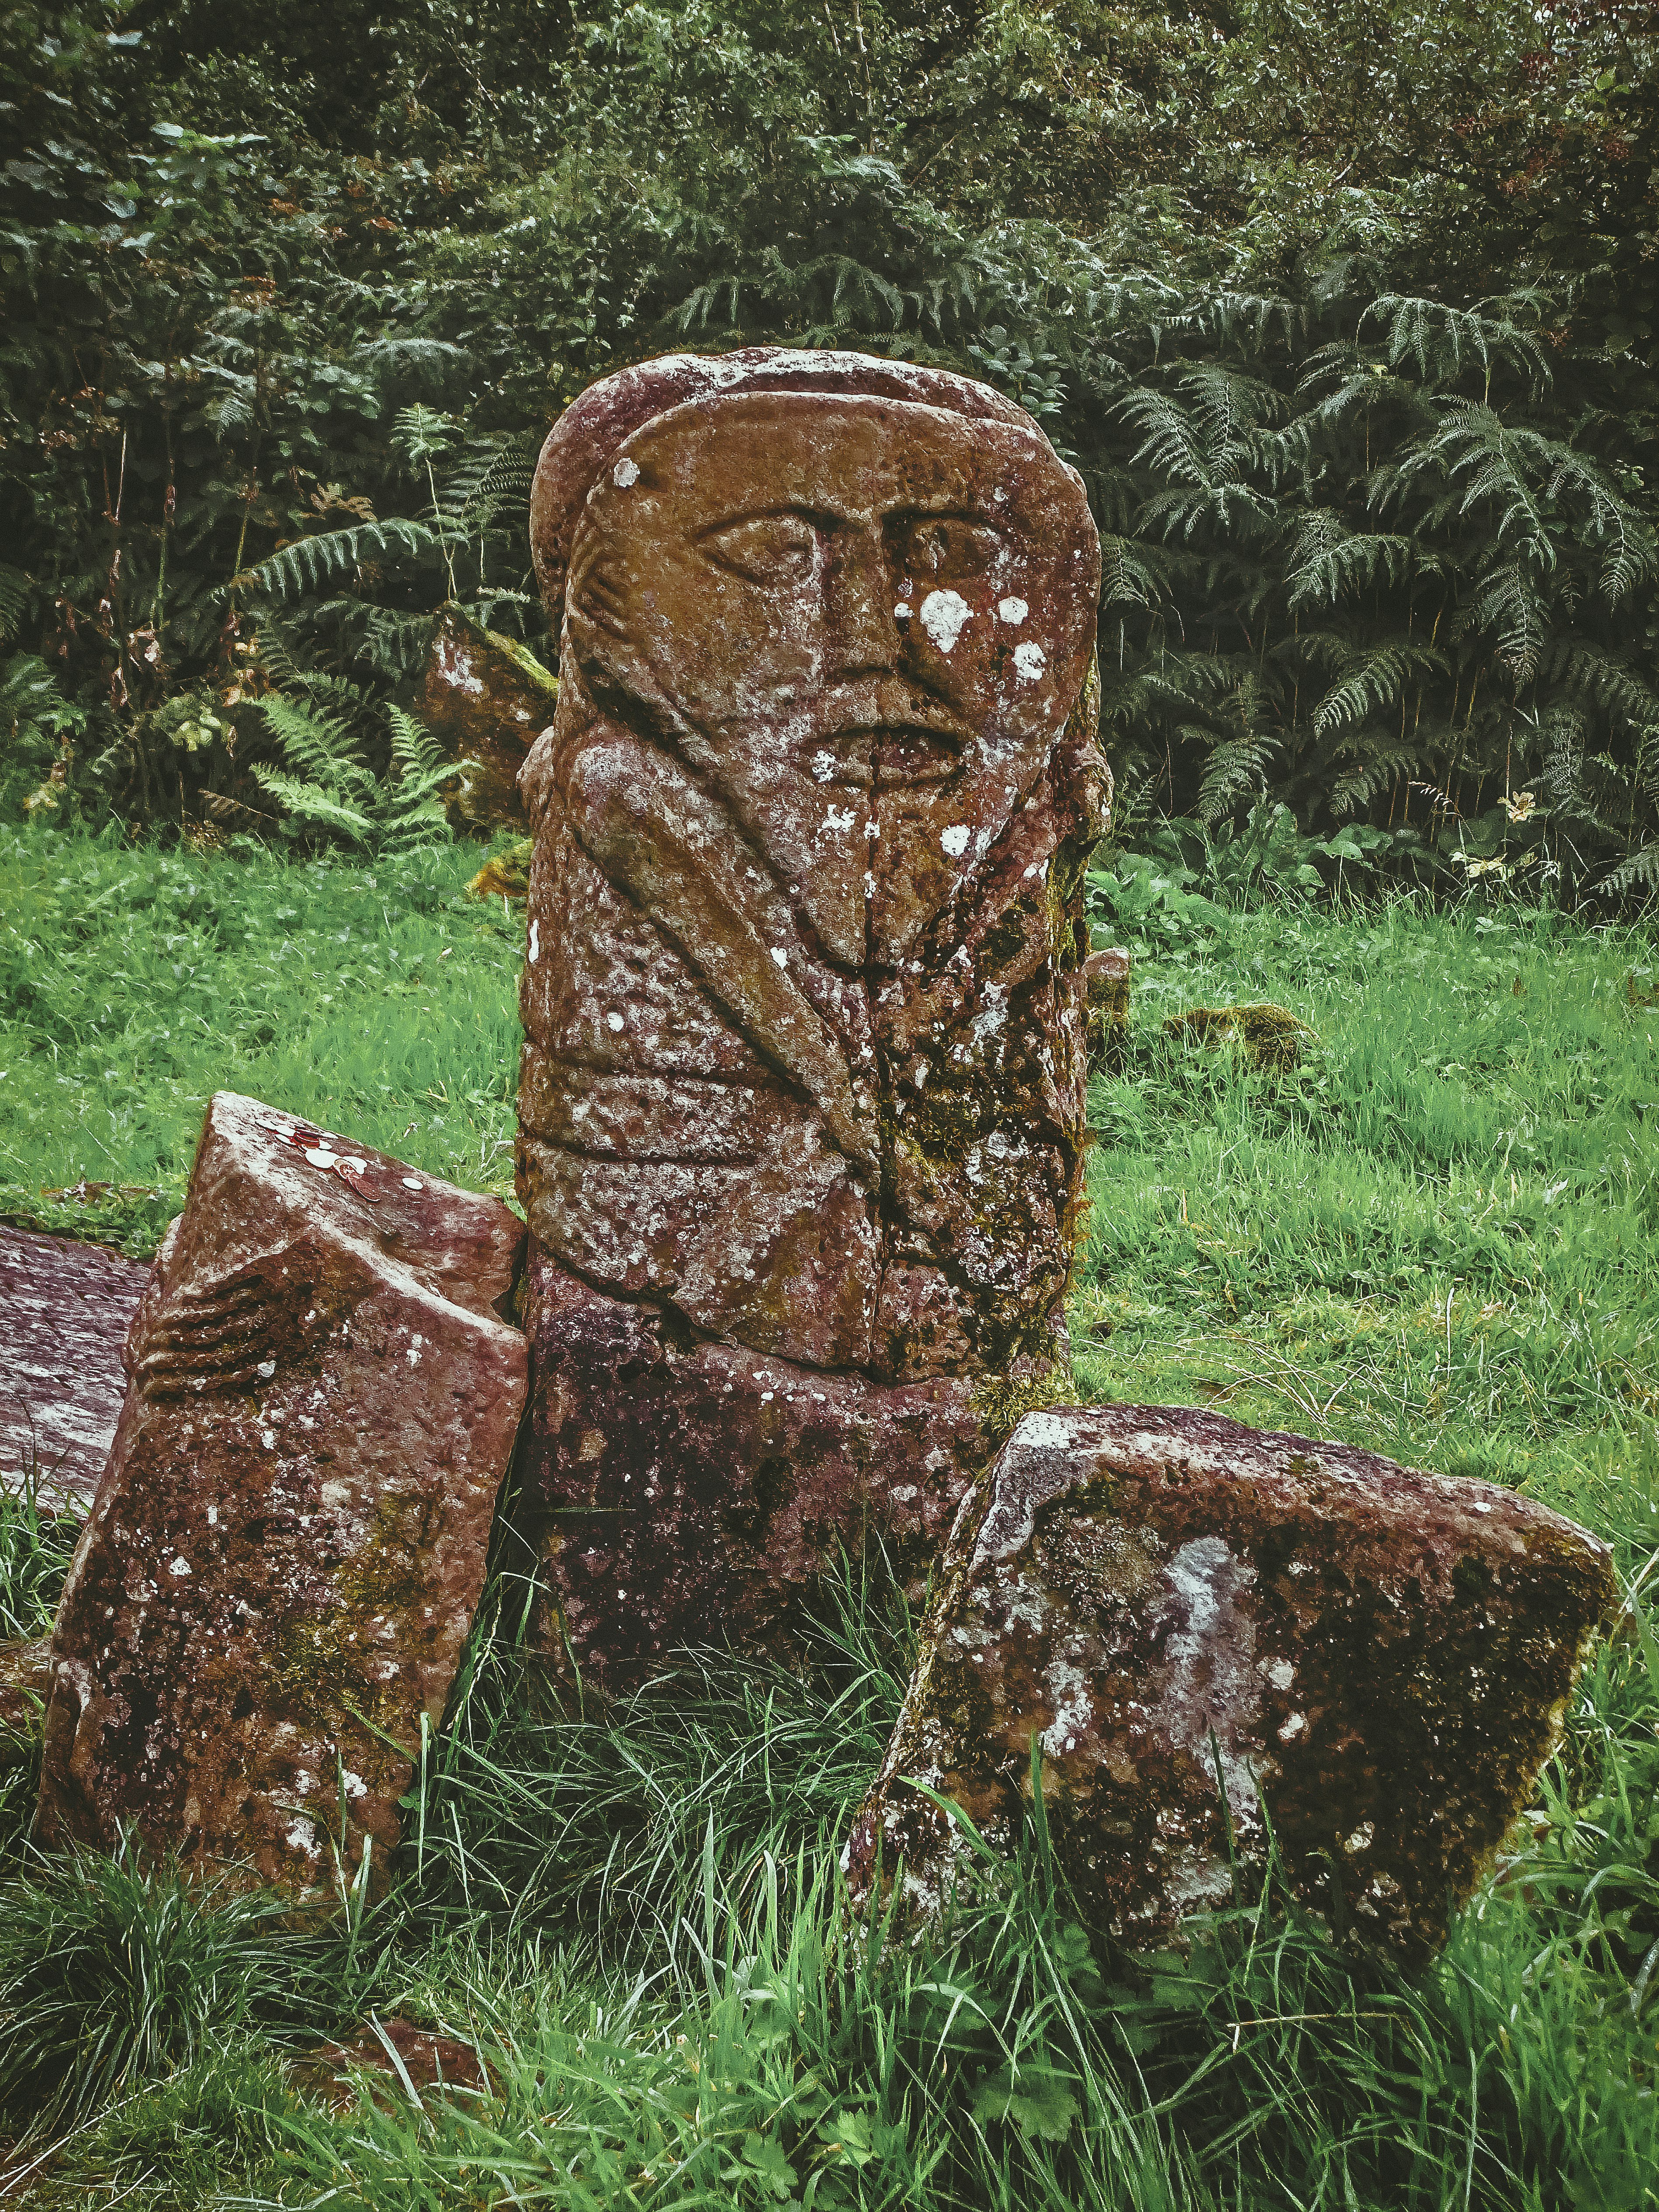 One side of the Janus Figure in late summer 2013.